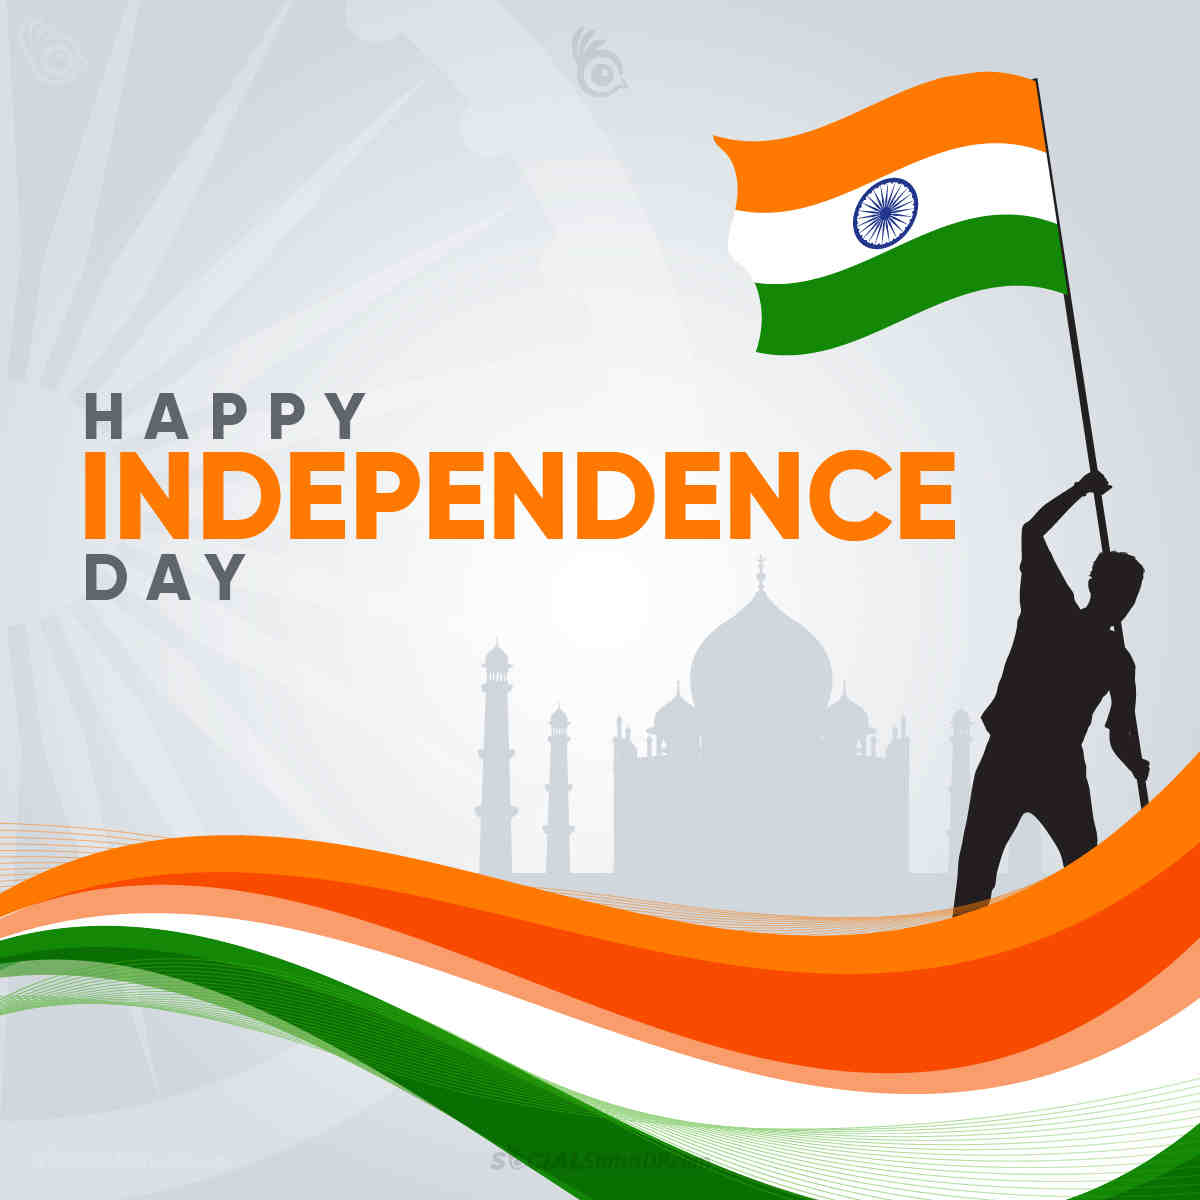 Happy Independence Day 2022 Image, Wishes, Quotes, Messages, Photo, Picture, Wallpaper